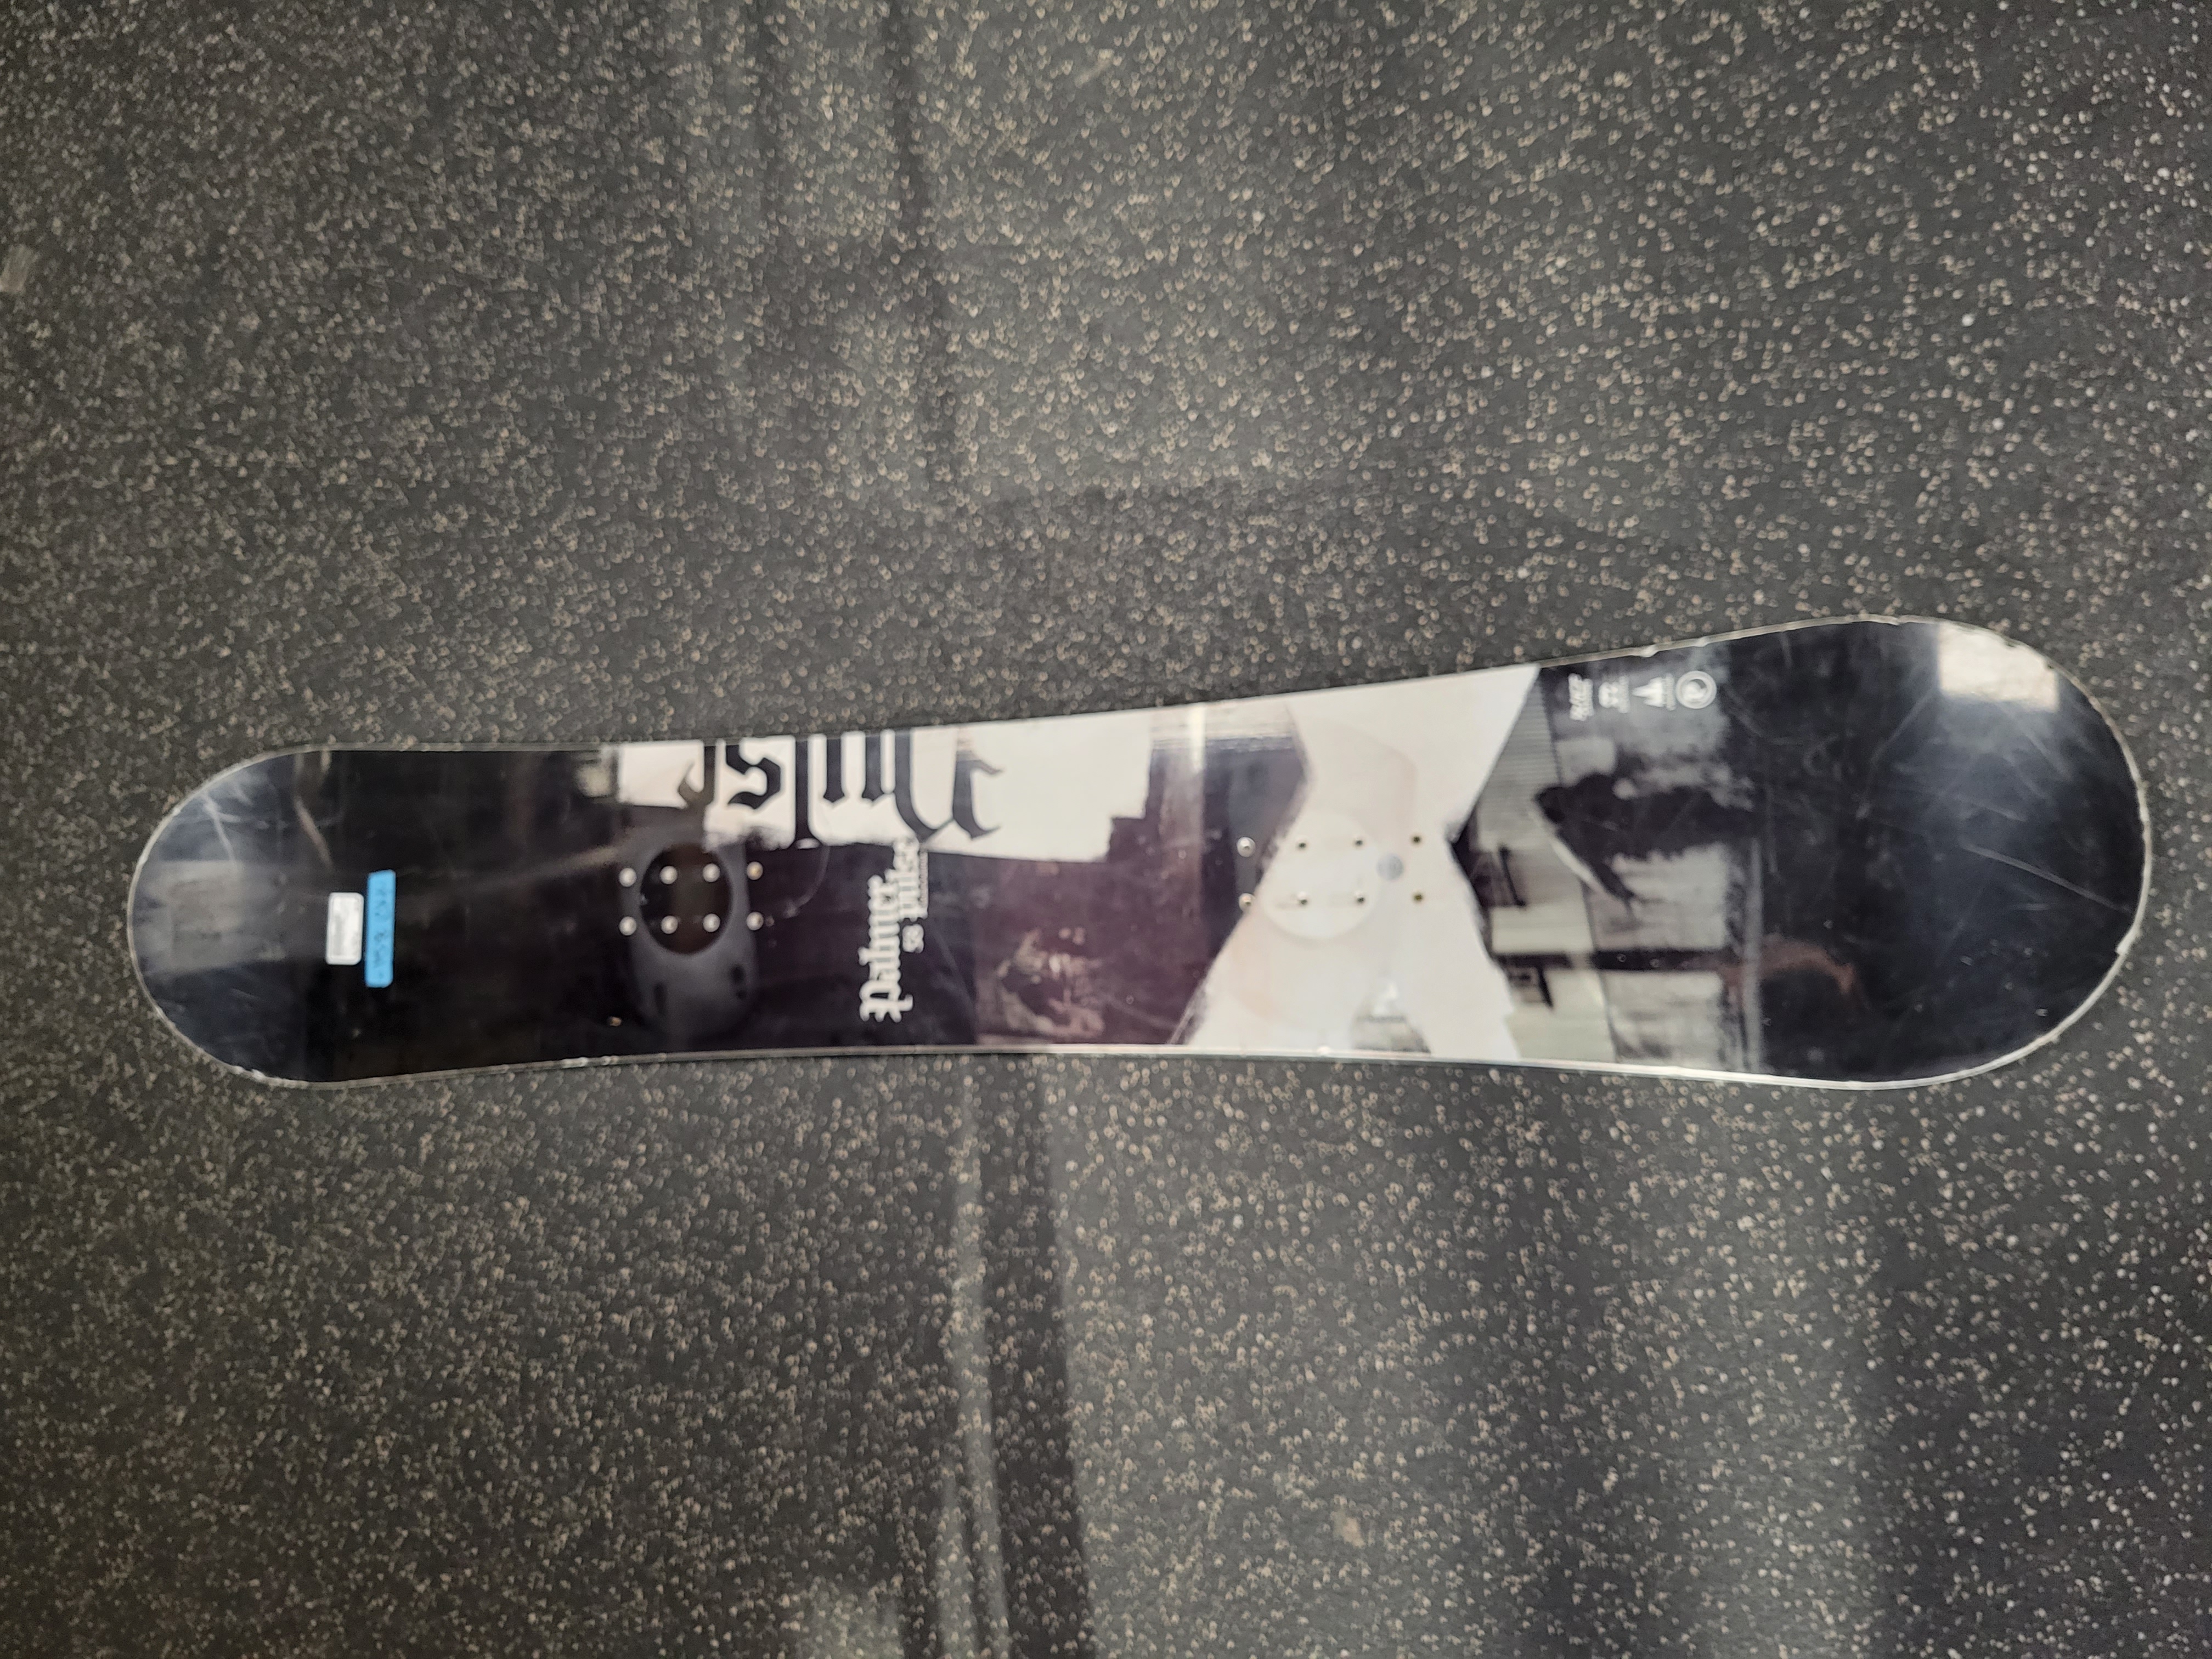 buy used snowboards online